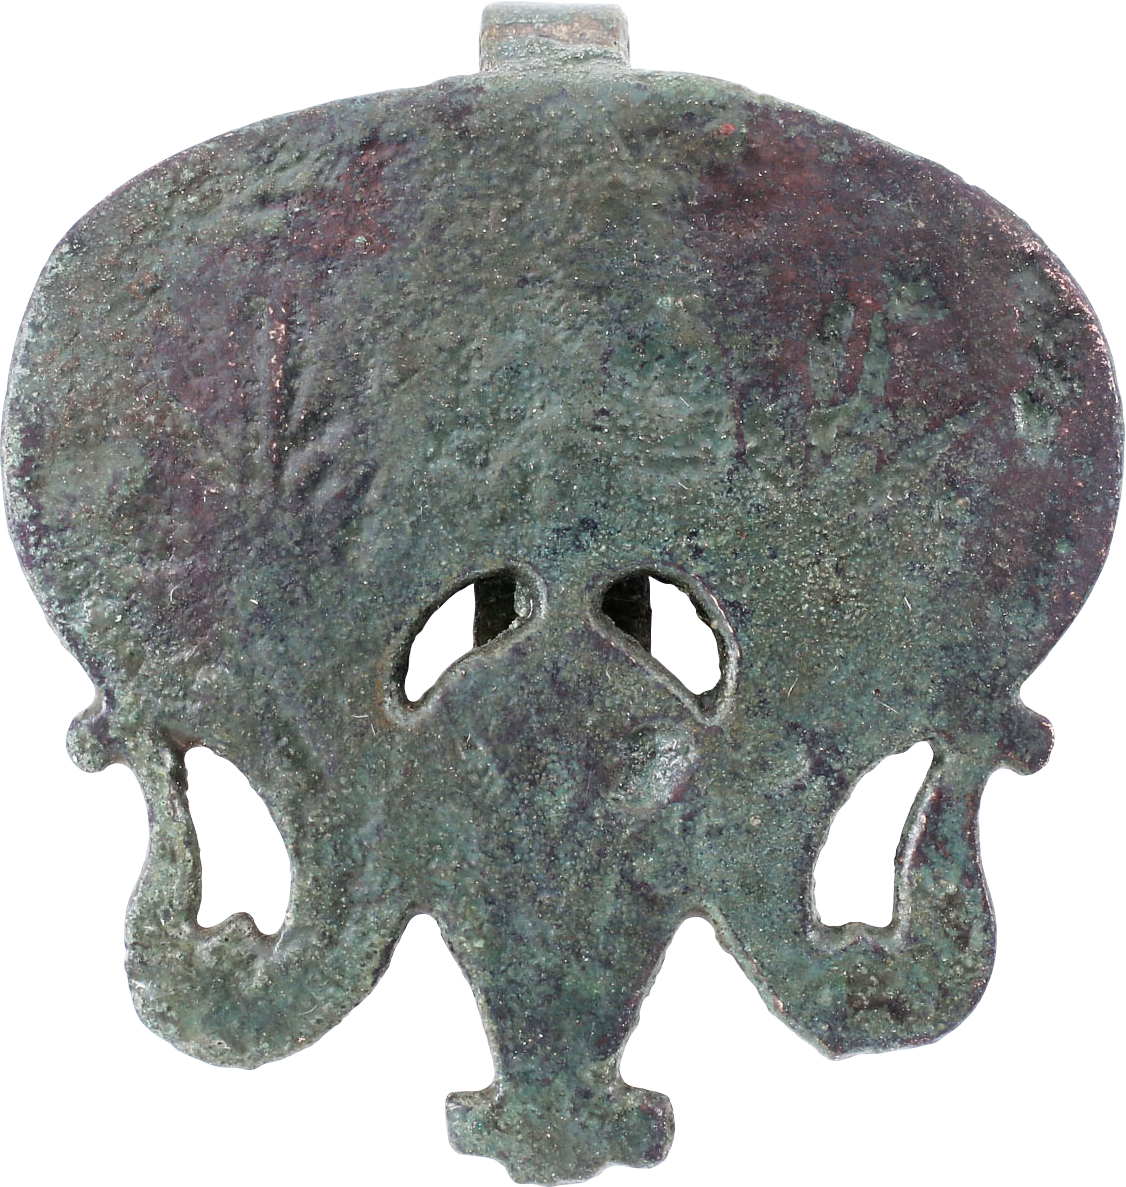 MEDIEVAL KNIGHT’S TOURNAMENT PENDANT - Fagan Arms